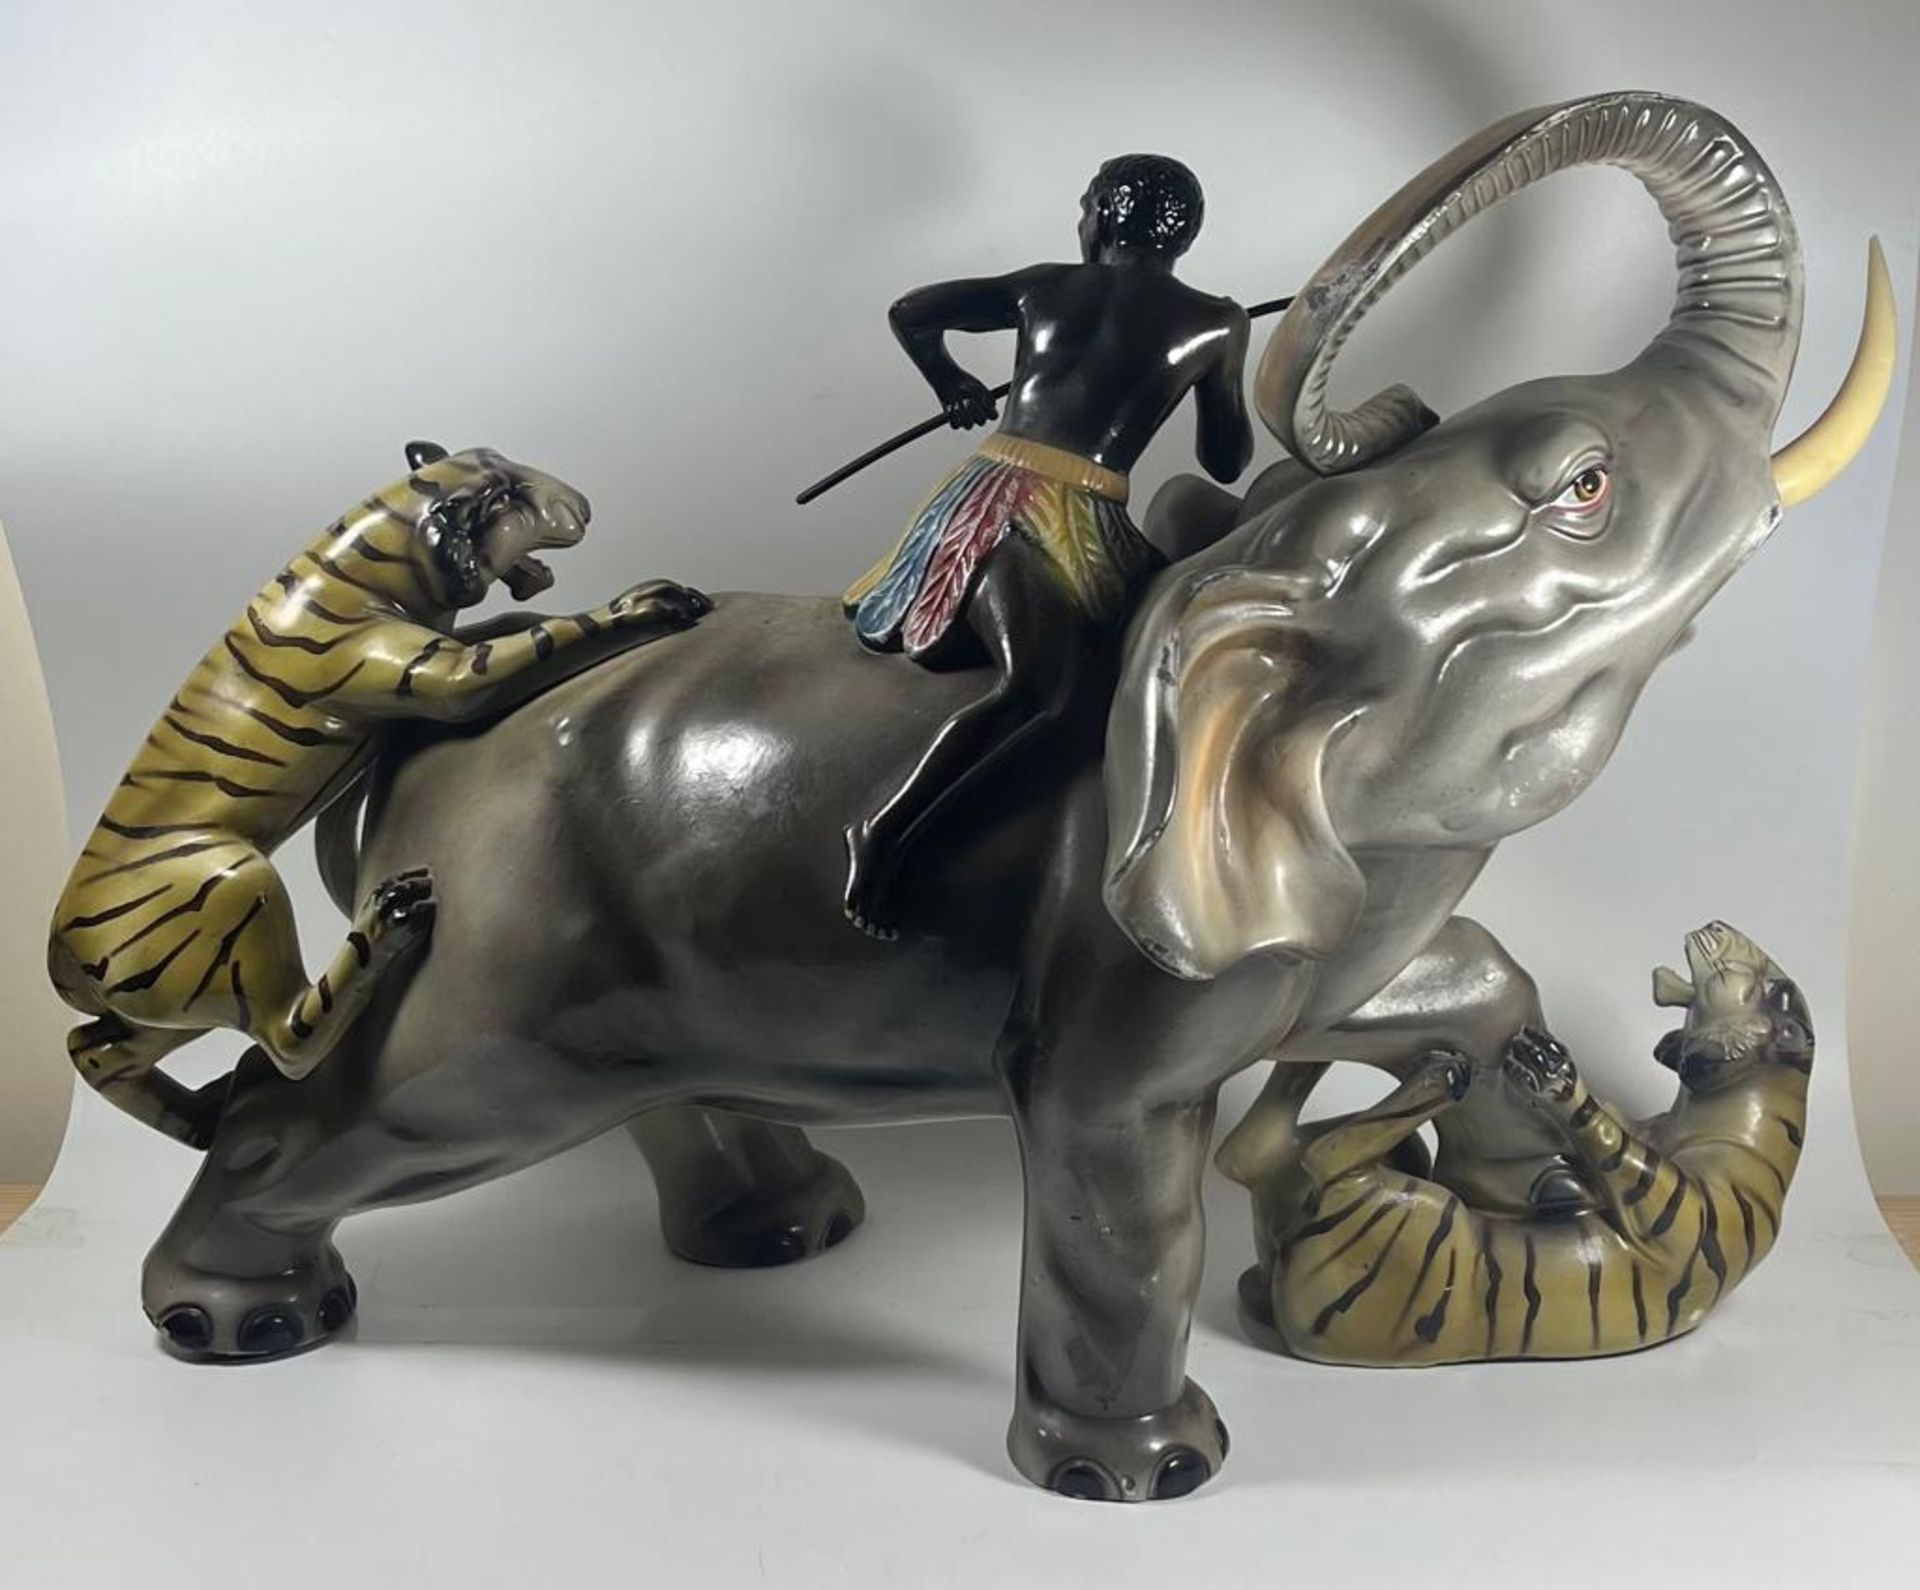 A LARGE 1970S ITALIAN POTTERY SCULPTURE OF AN ELEPHANT BEING ATTACKED BY TIGERS, LENGTH 49 CM - Image 6 of 6